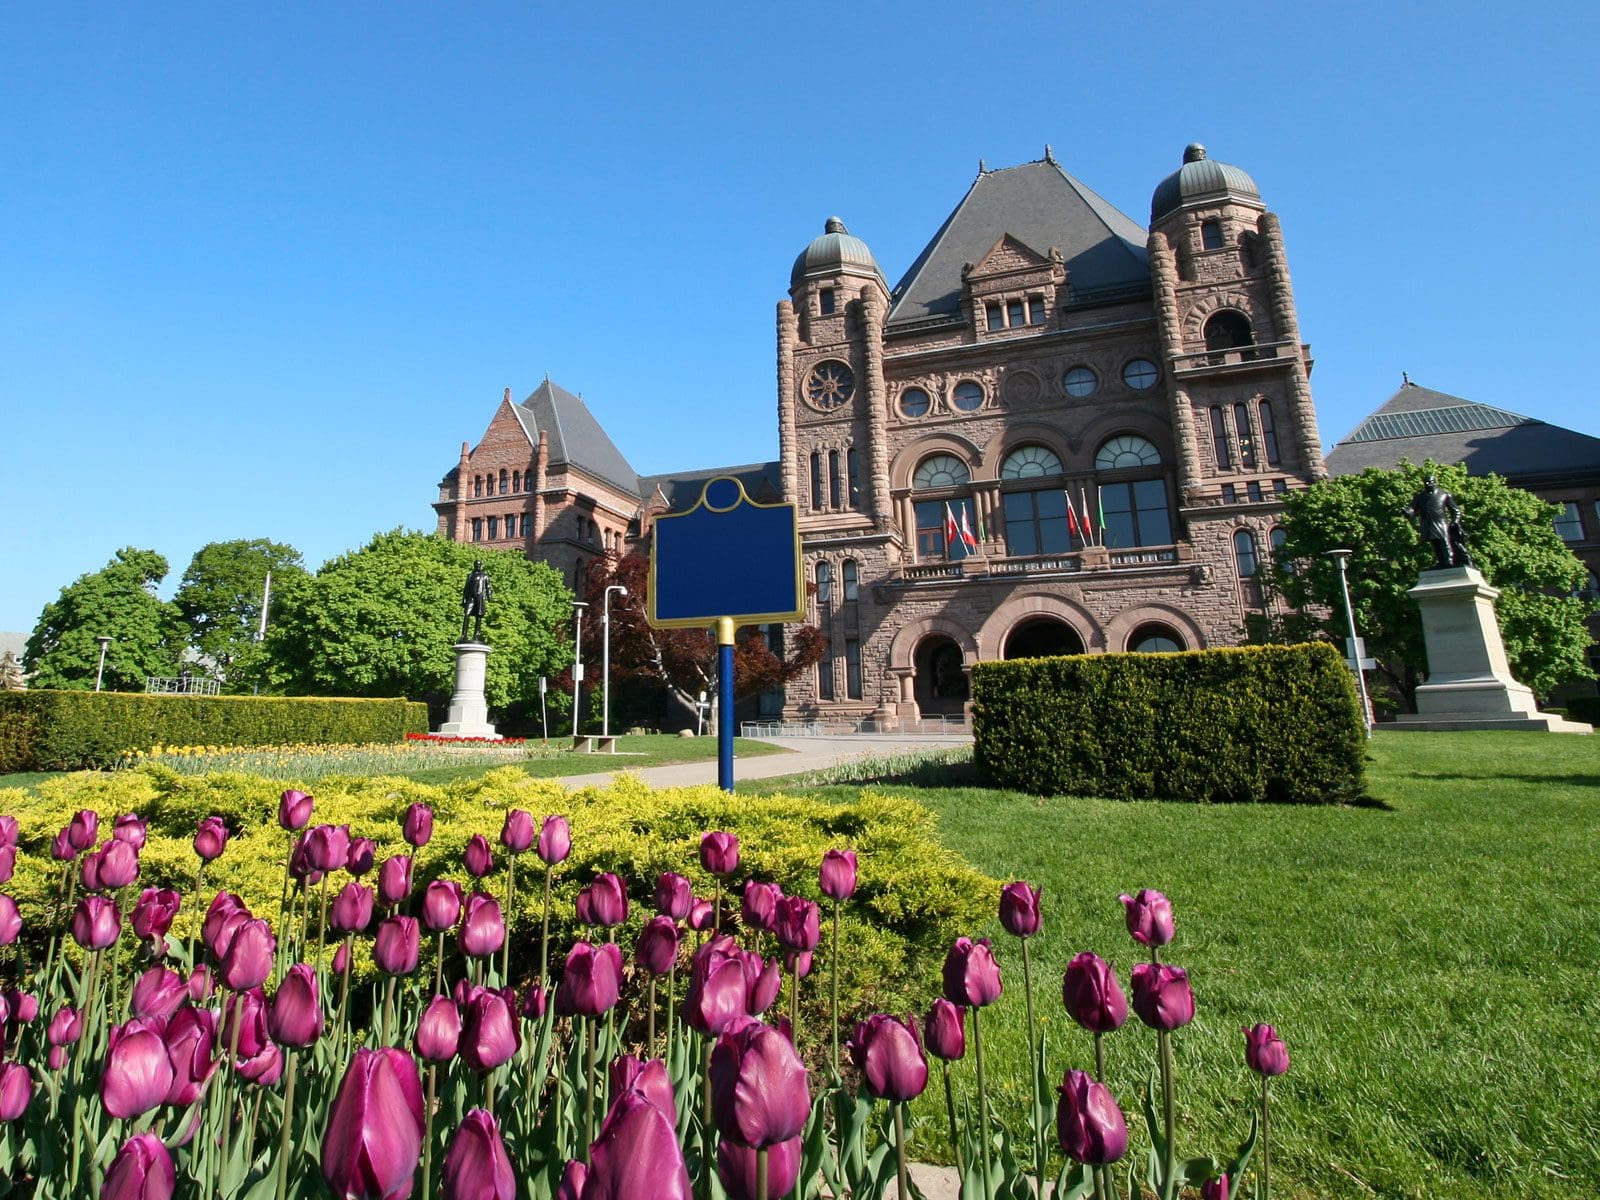 Making a mark at Queen’s Park